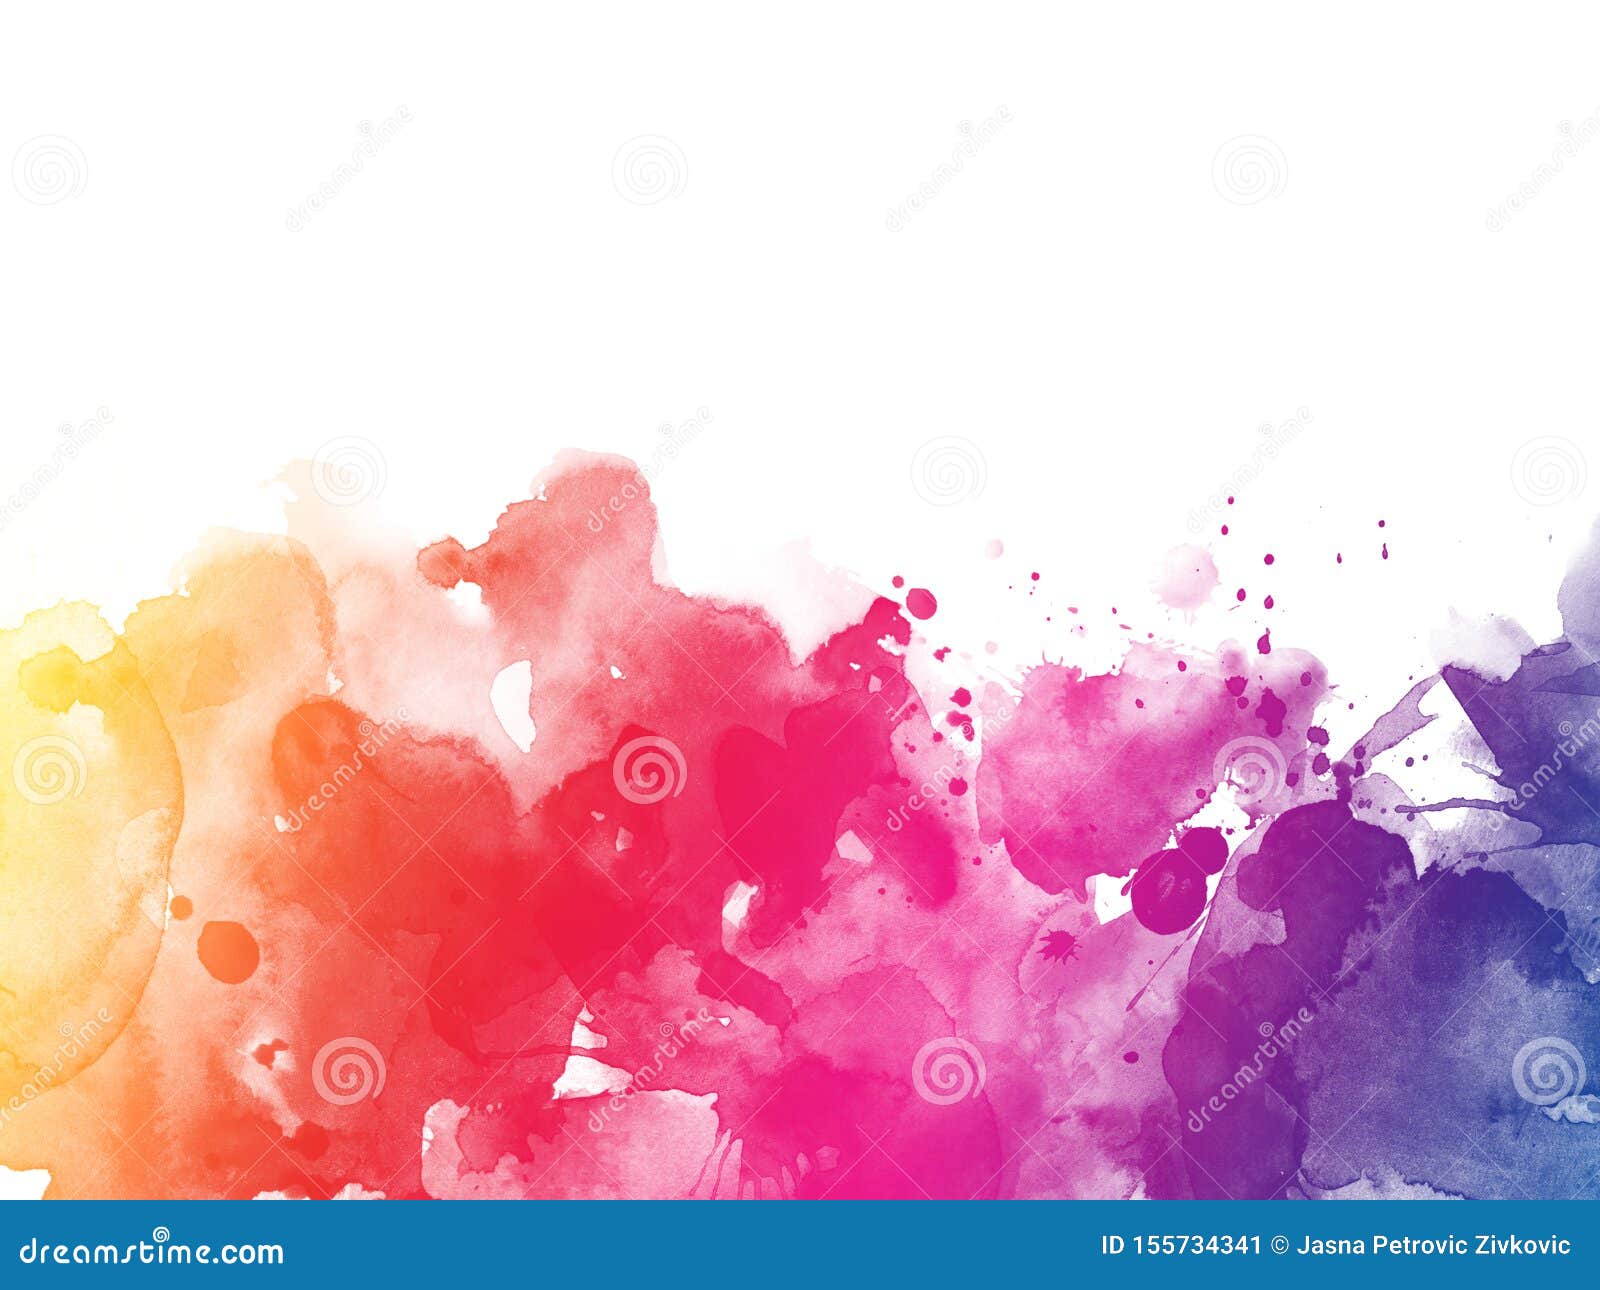 Colorful Abstract Artistic Watercolor Splash Background Stock Image - Image  of document, graphic: 155734341